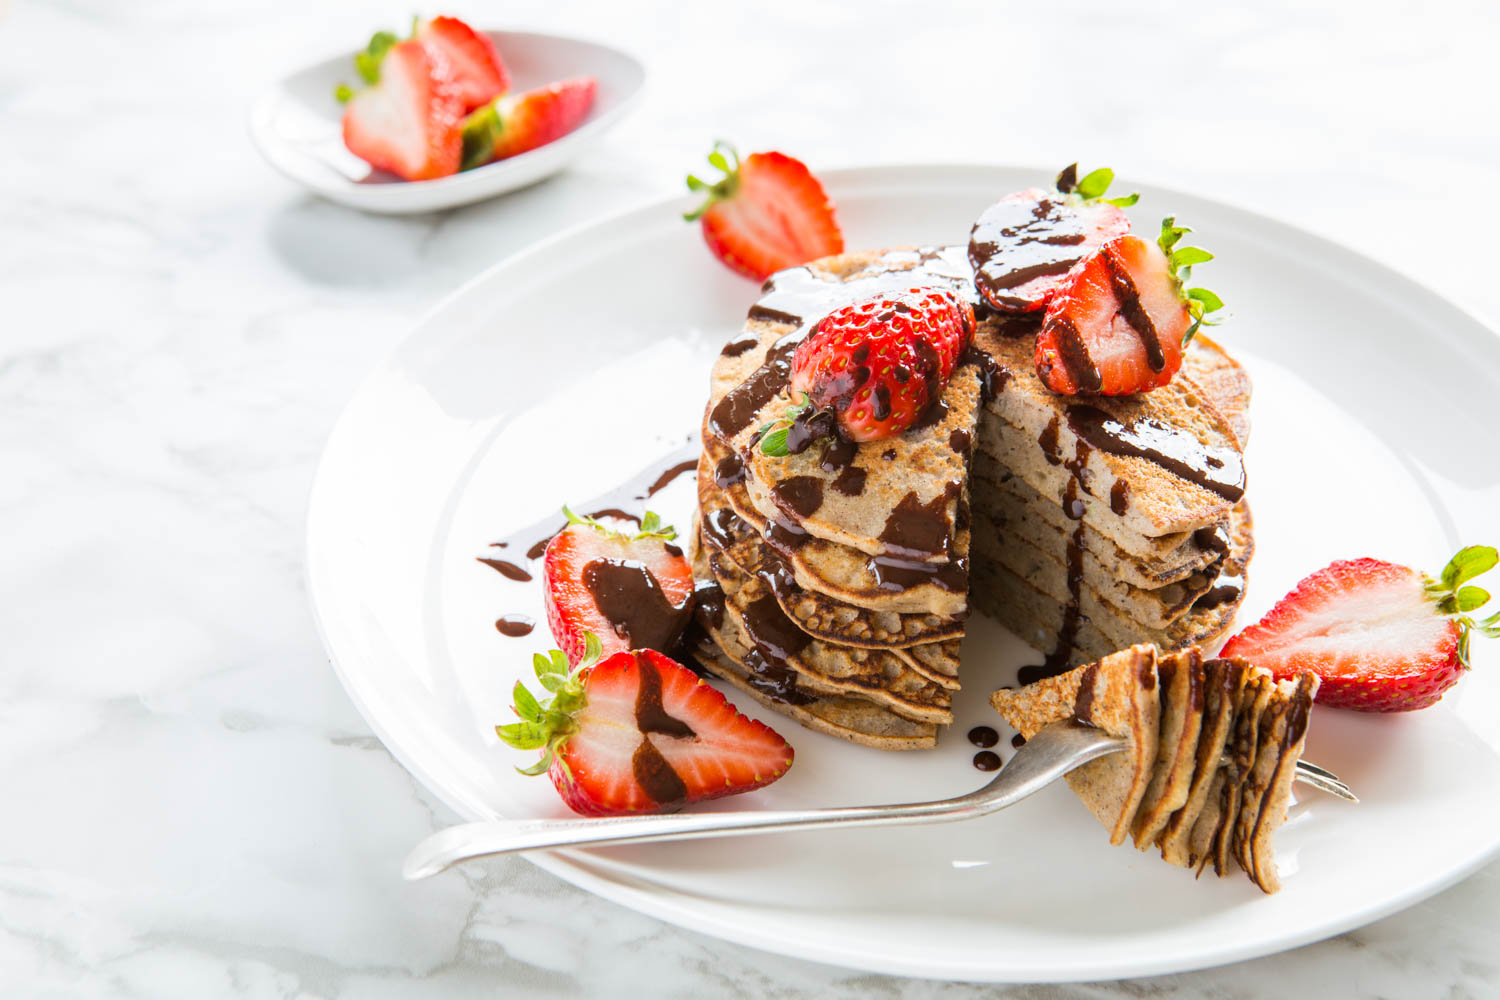 Easy-flip Pancakes with Chocolate Drizzle | Nadia Felsch